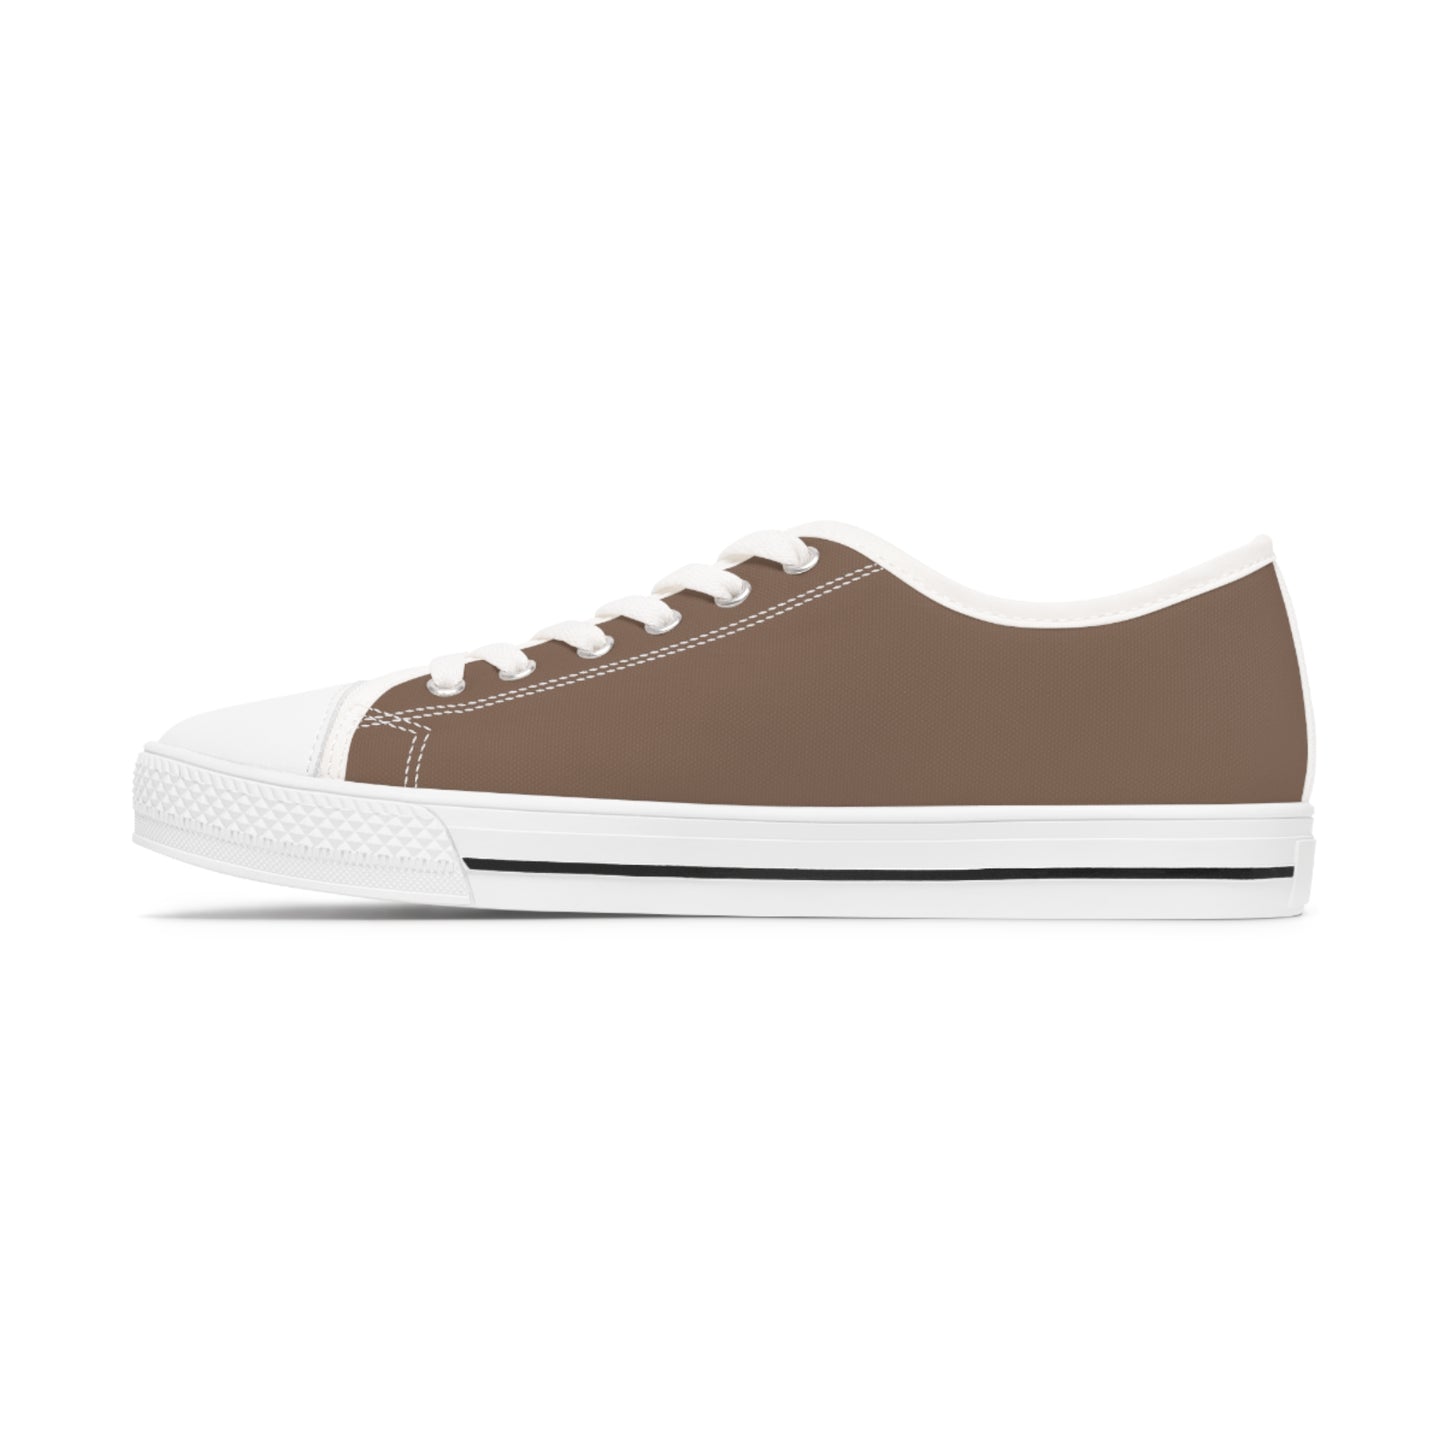 Women's Canvas Low Top Solid Color Sneakers - Latte Tan US 12 White sole